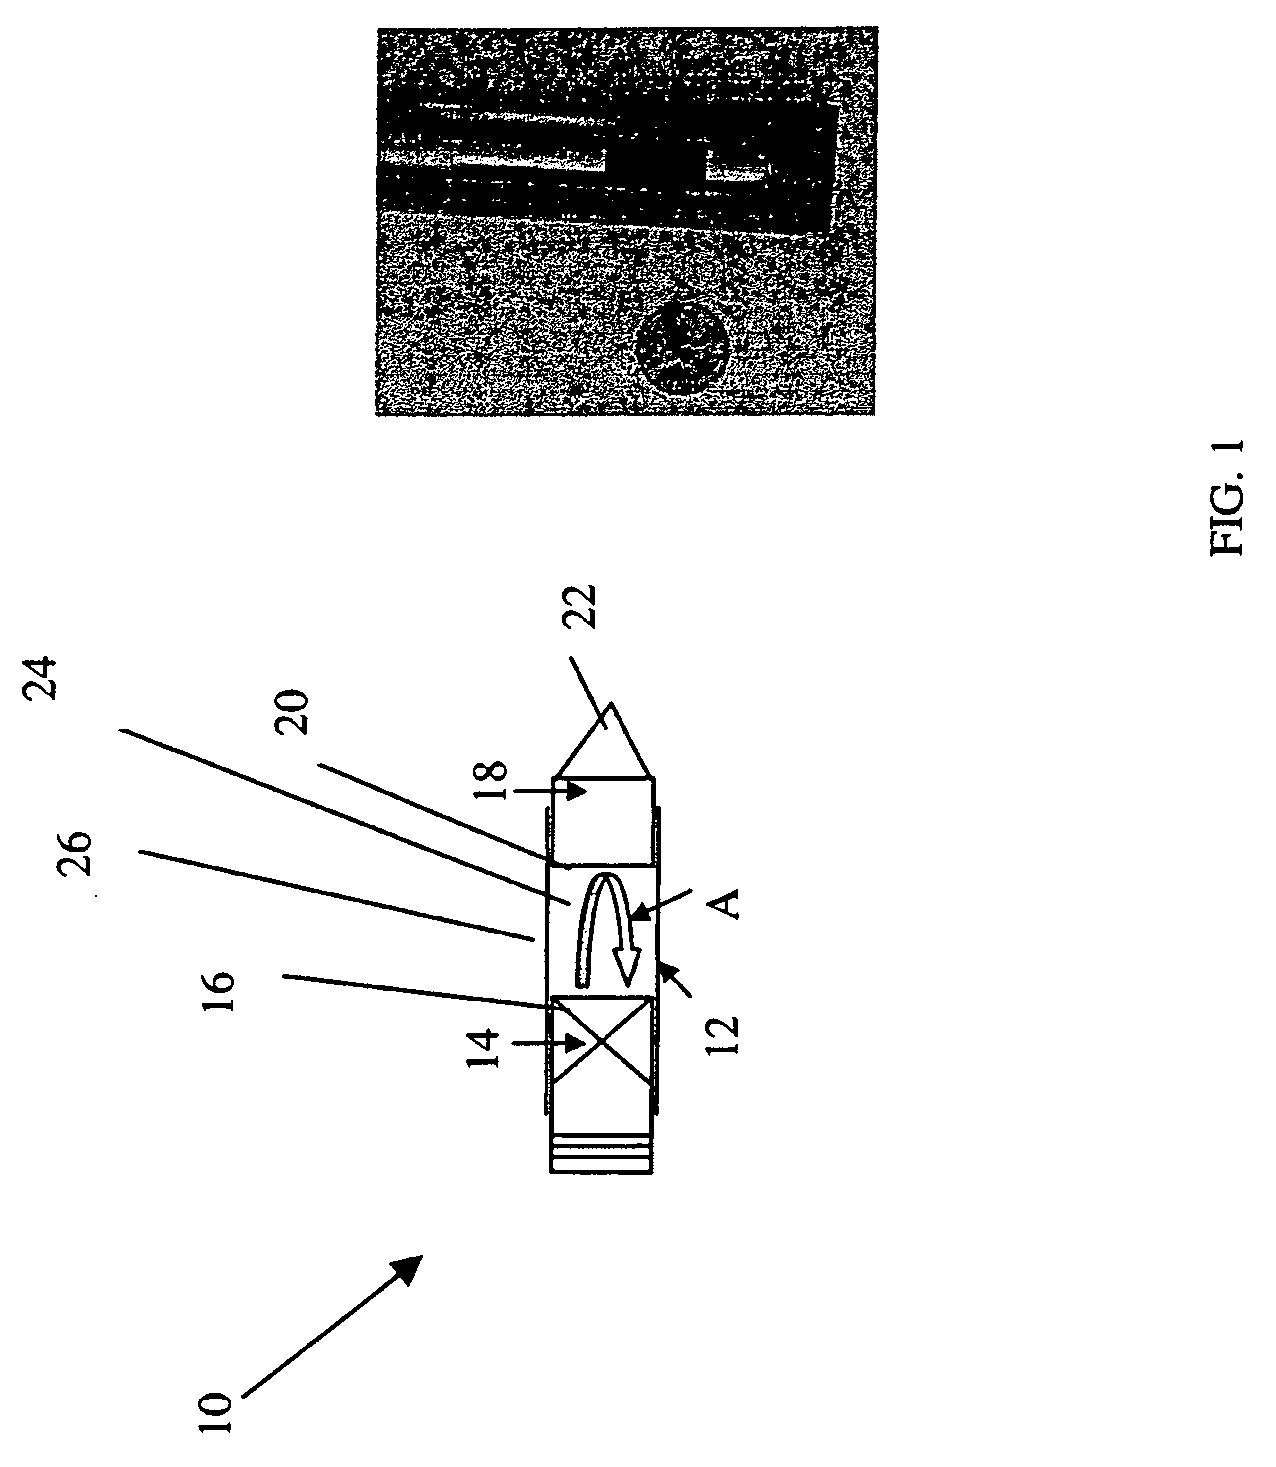 Devices, methods and systems for measuring one or more characteristics of a biomaterial in a suspension